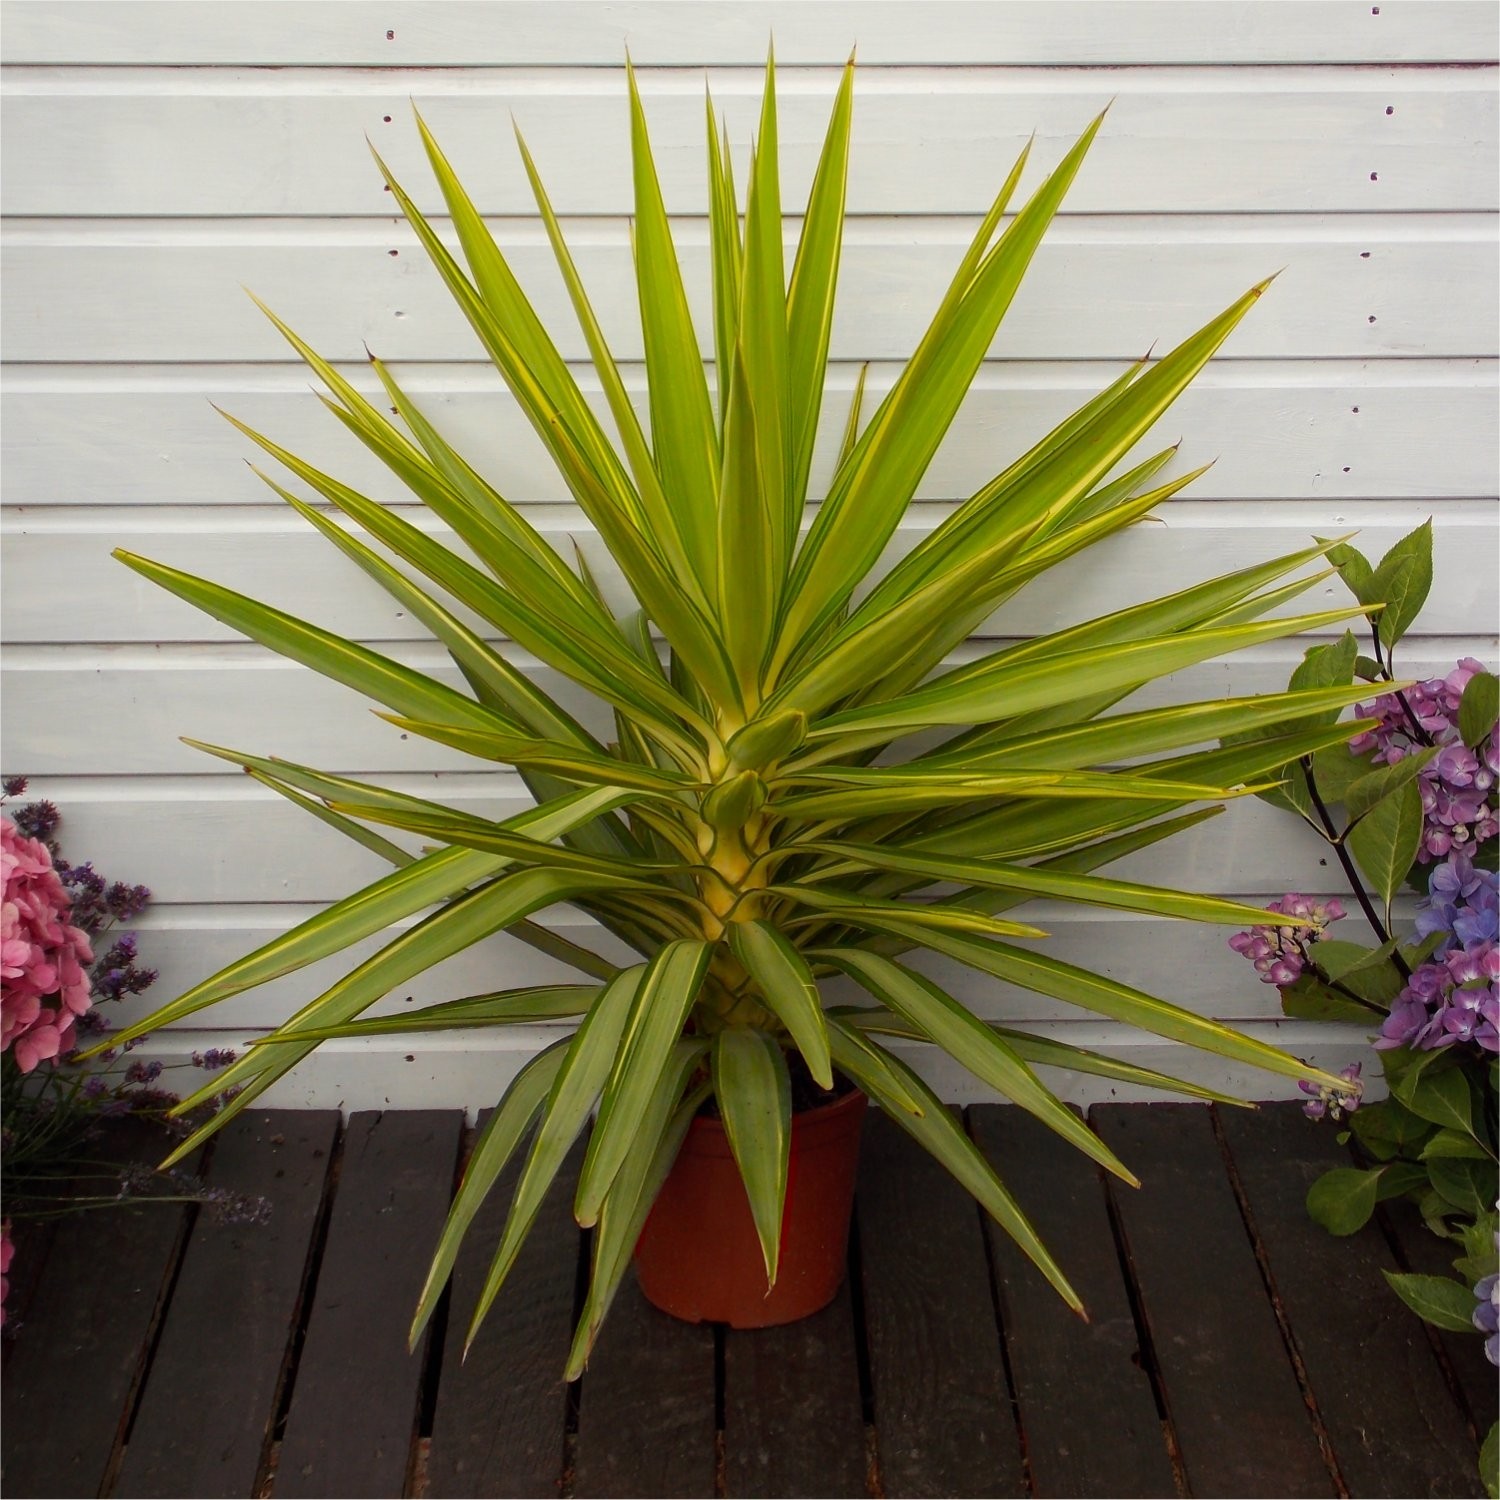 LARGE Patio Adams Needle Yucca Jewel Palm Trees - Approx 80-100cms Adam's Needle Yucca Plant For Sale